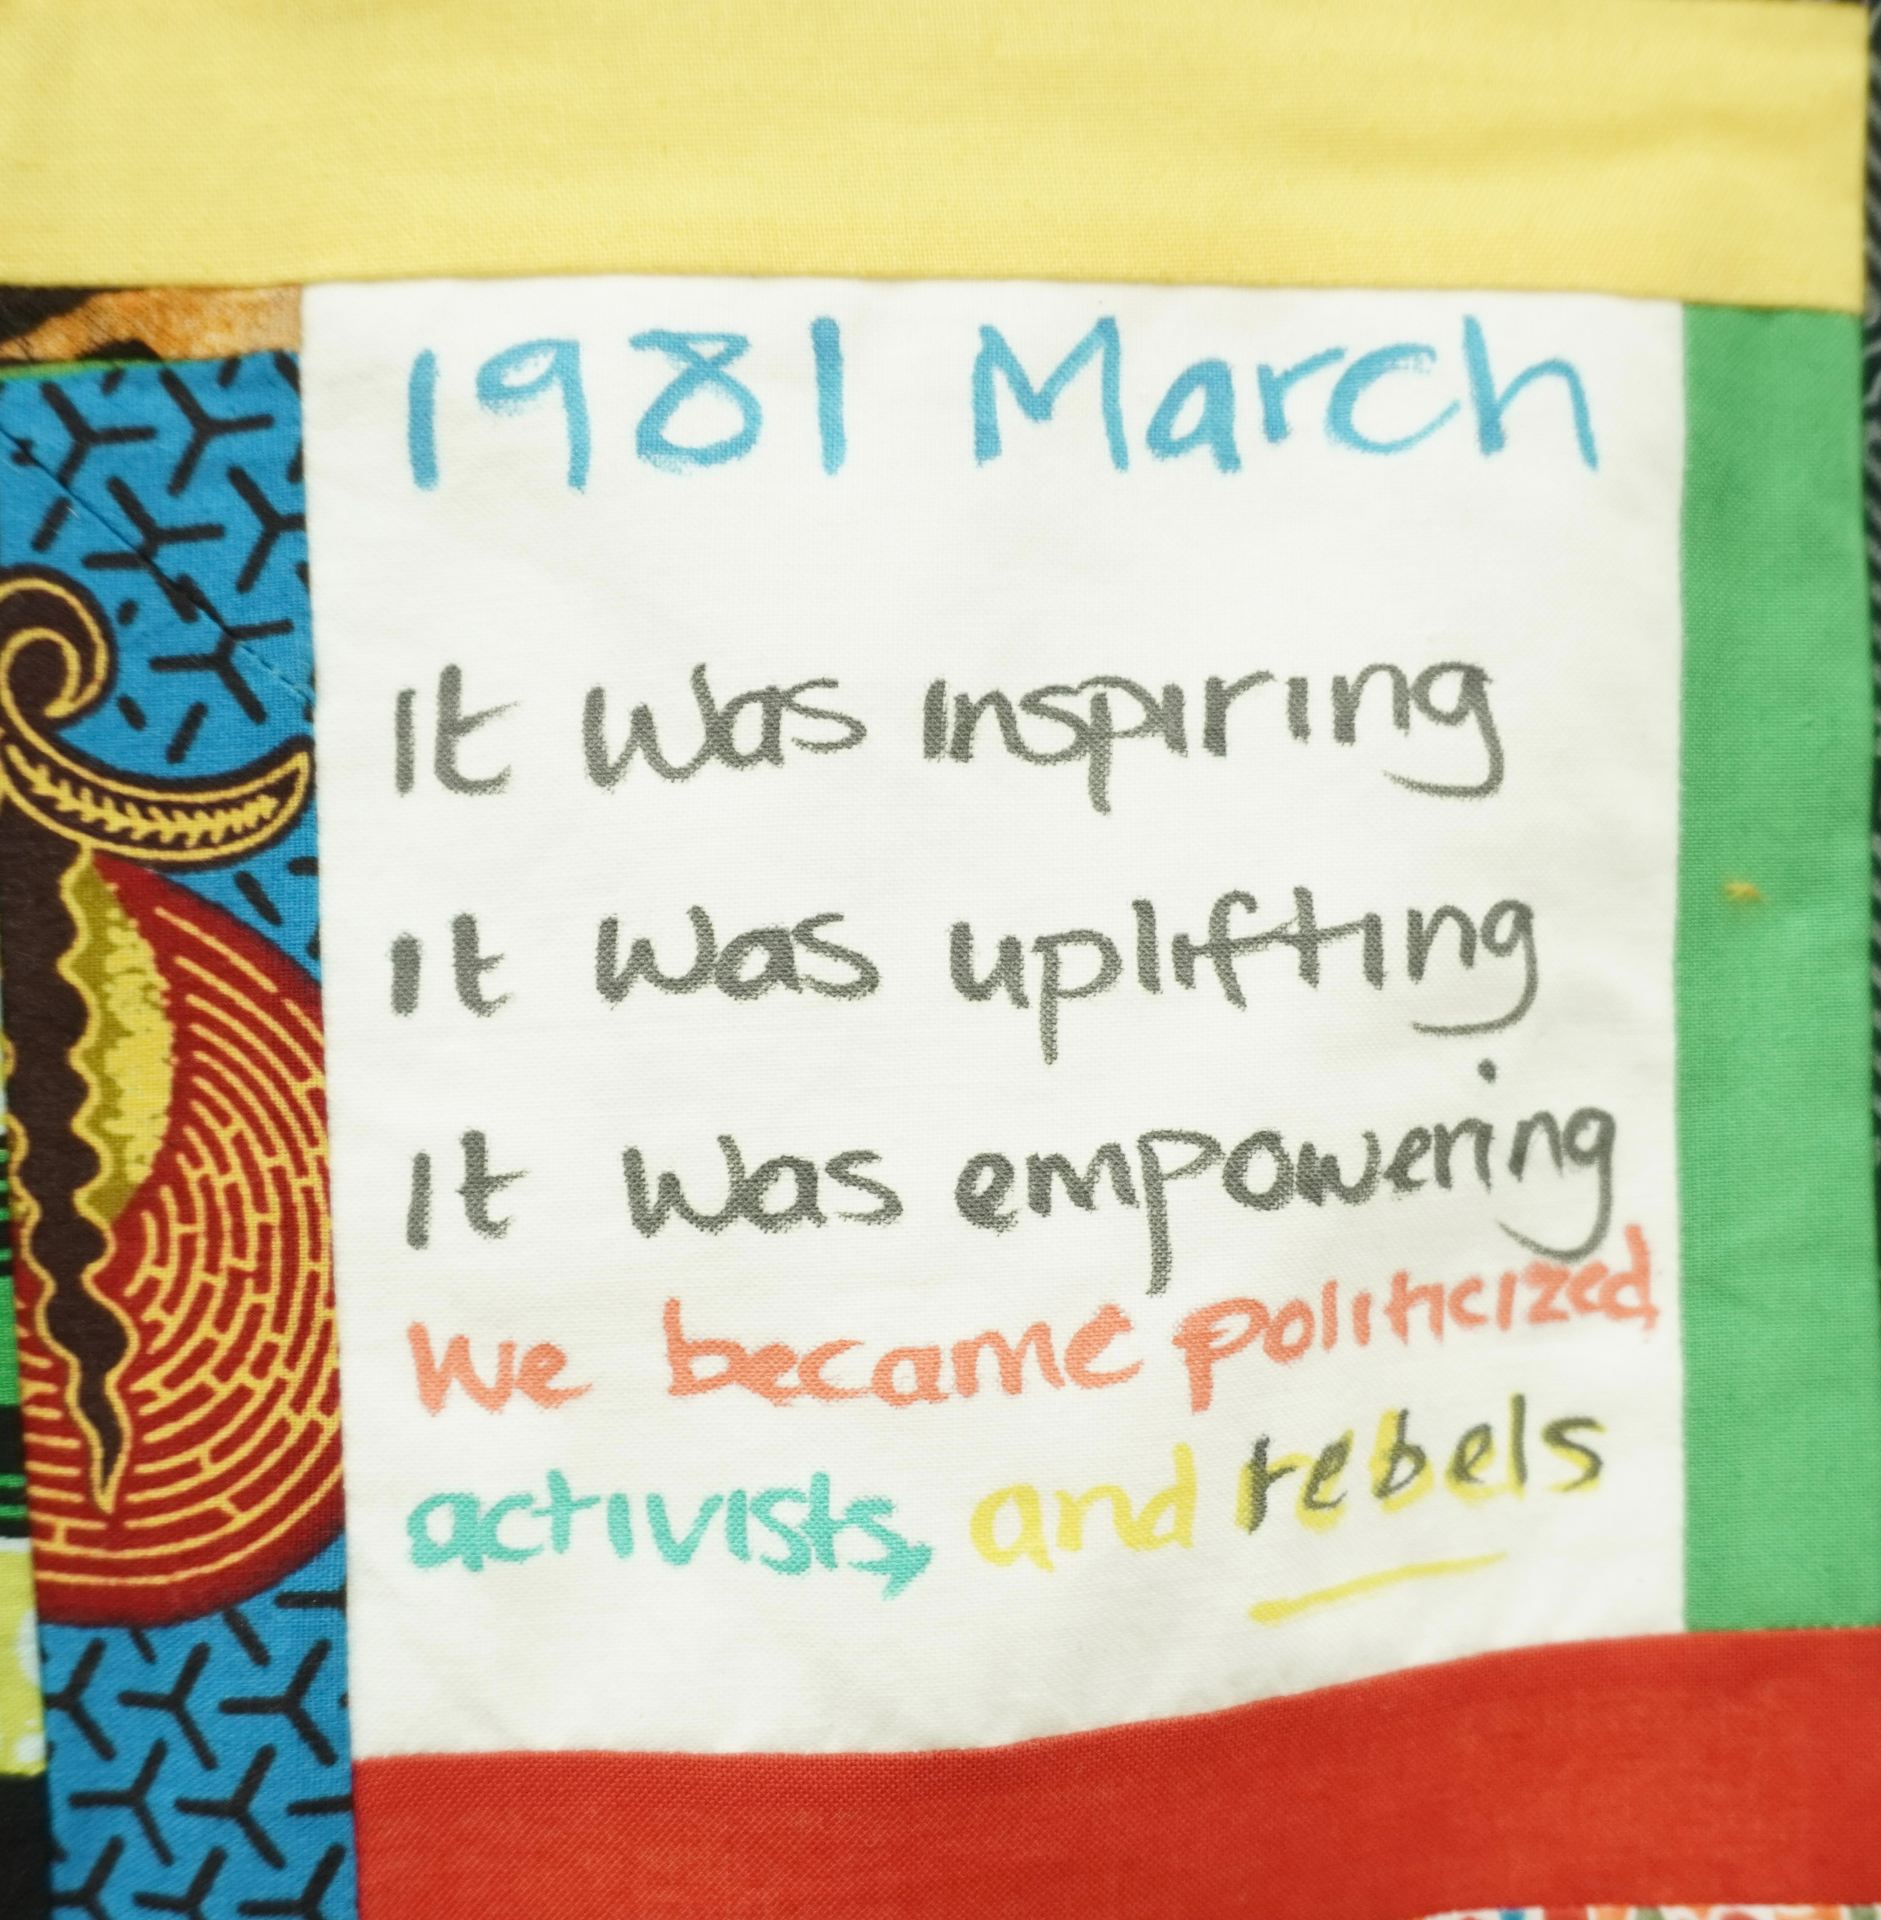 Commemorative quilt. Text reads, '1981 March. It was inspiring, it was uplifting, it was empowering, we became politicized, activists and rebels'